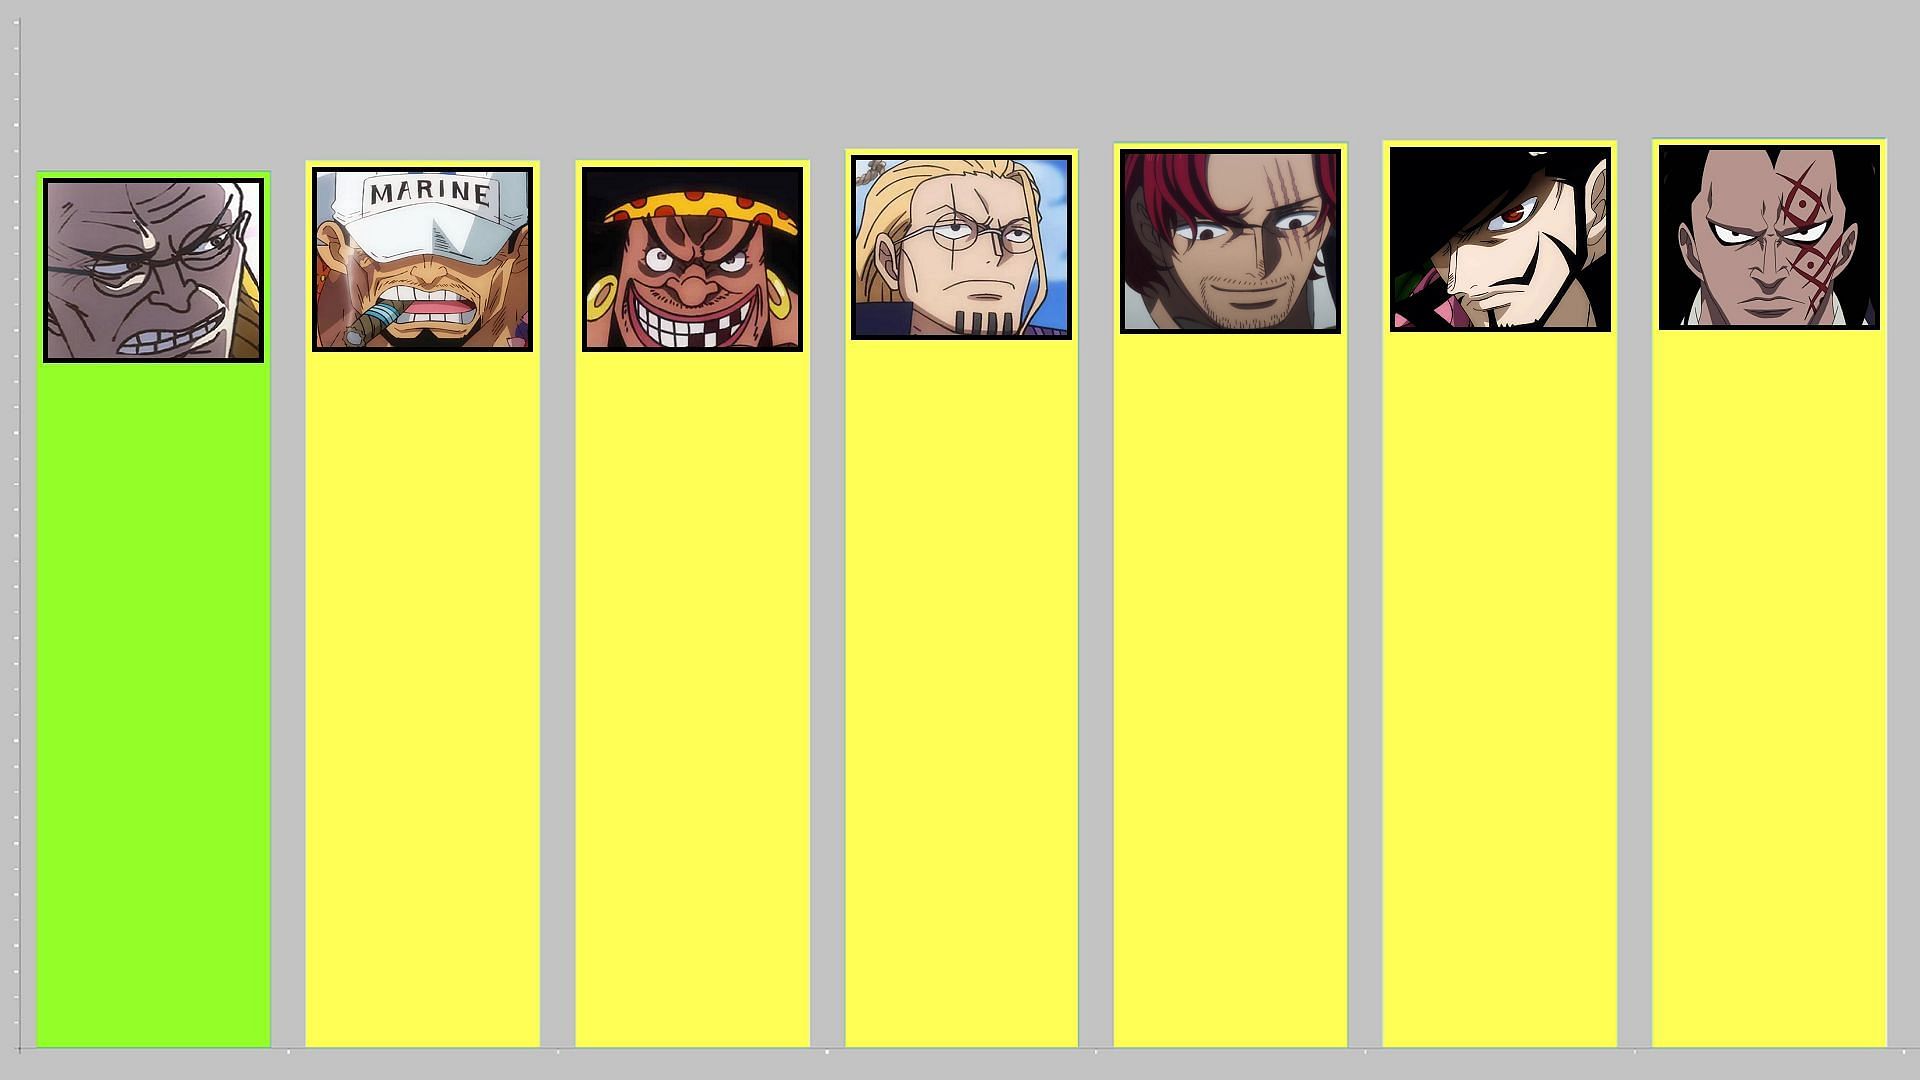 Ranking positions from 14th to 8th (Image via Toei Animation, One Piece)